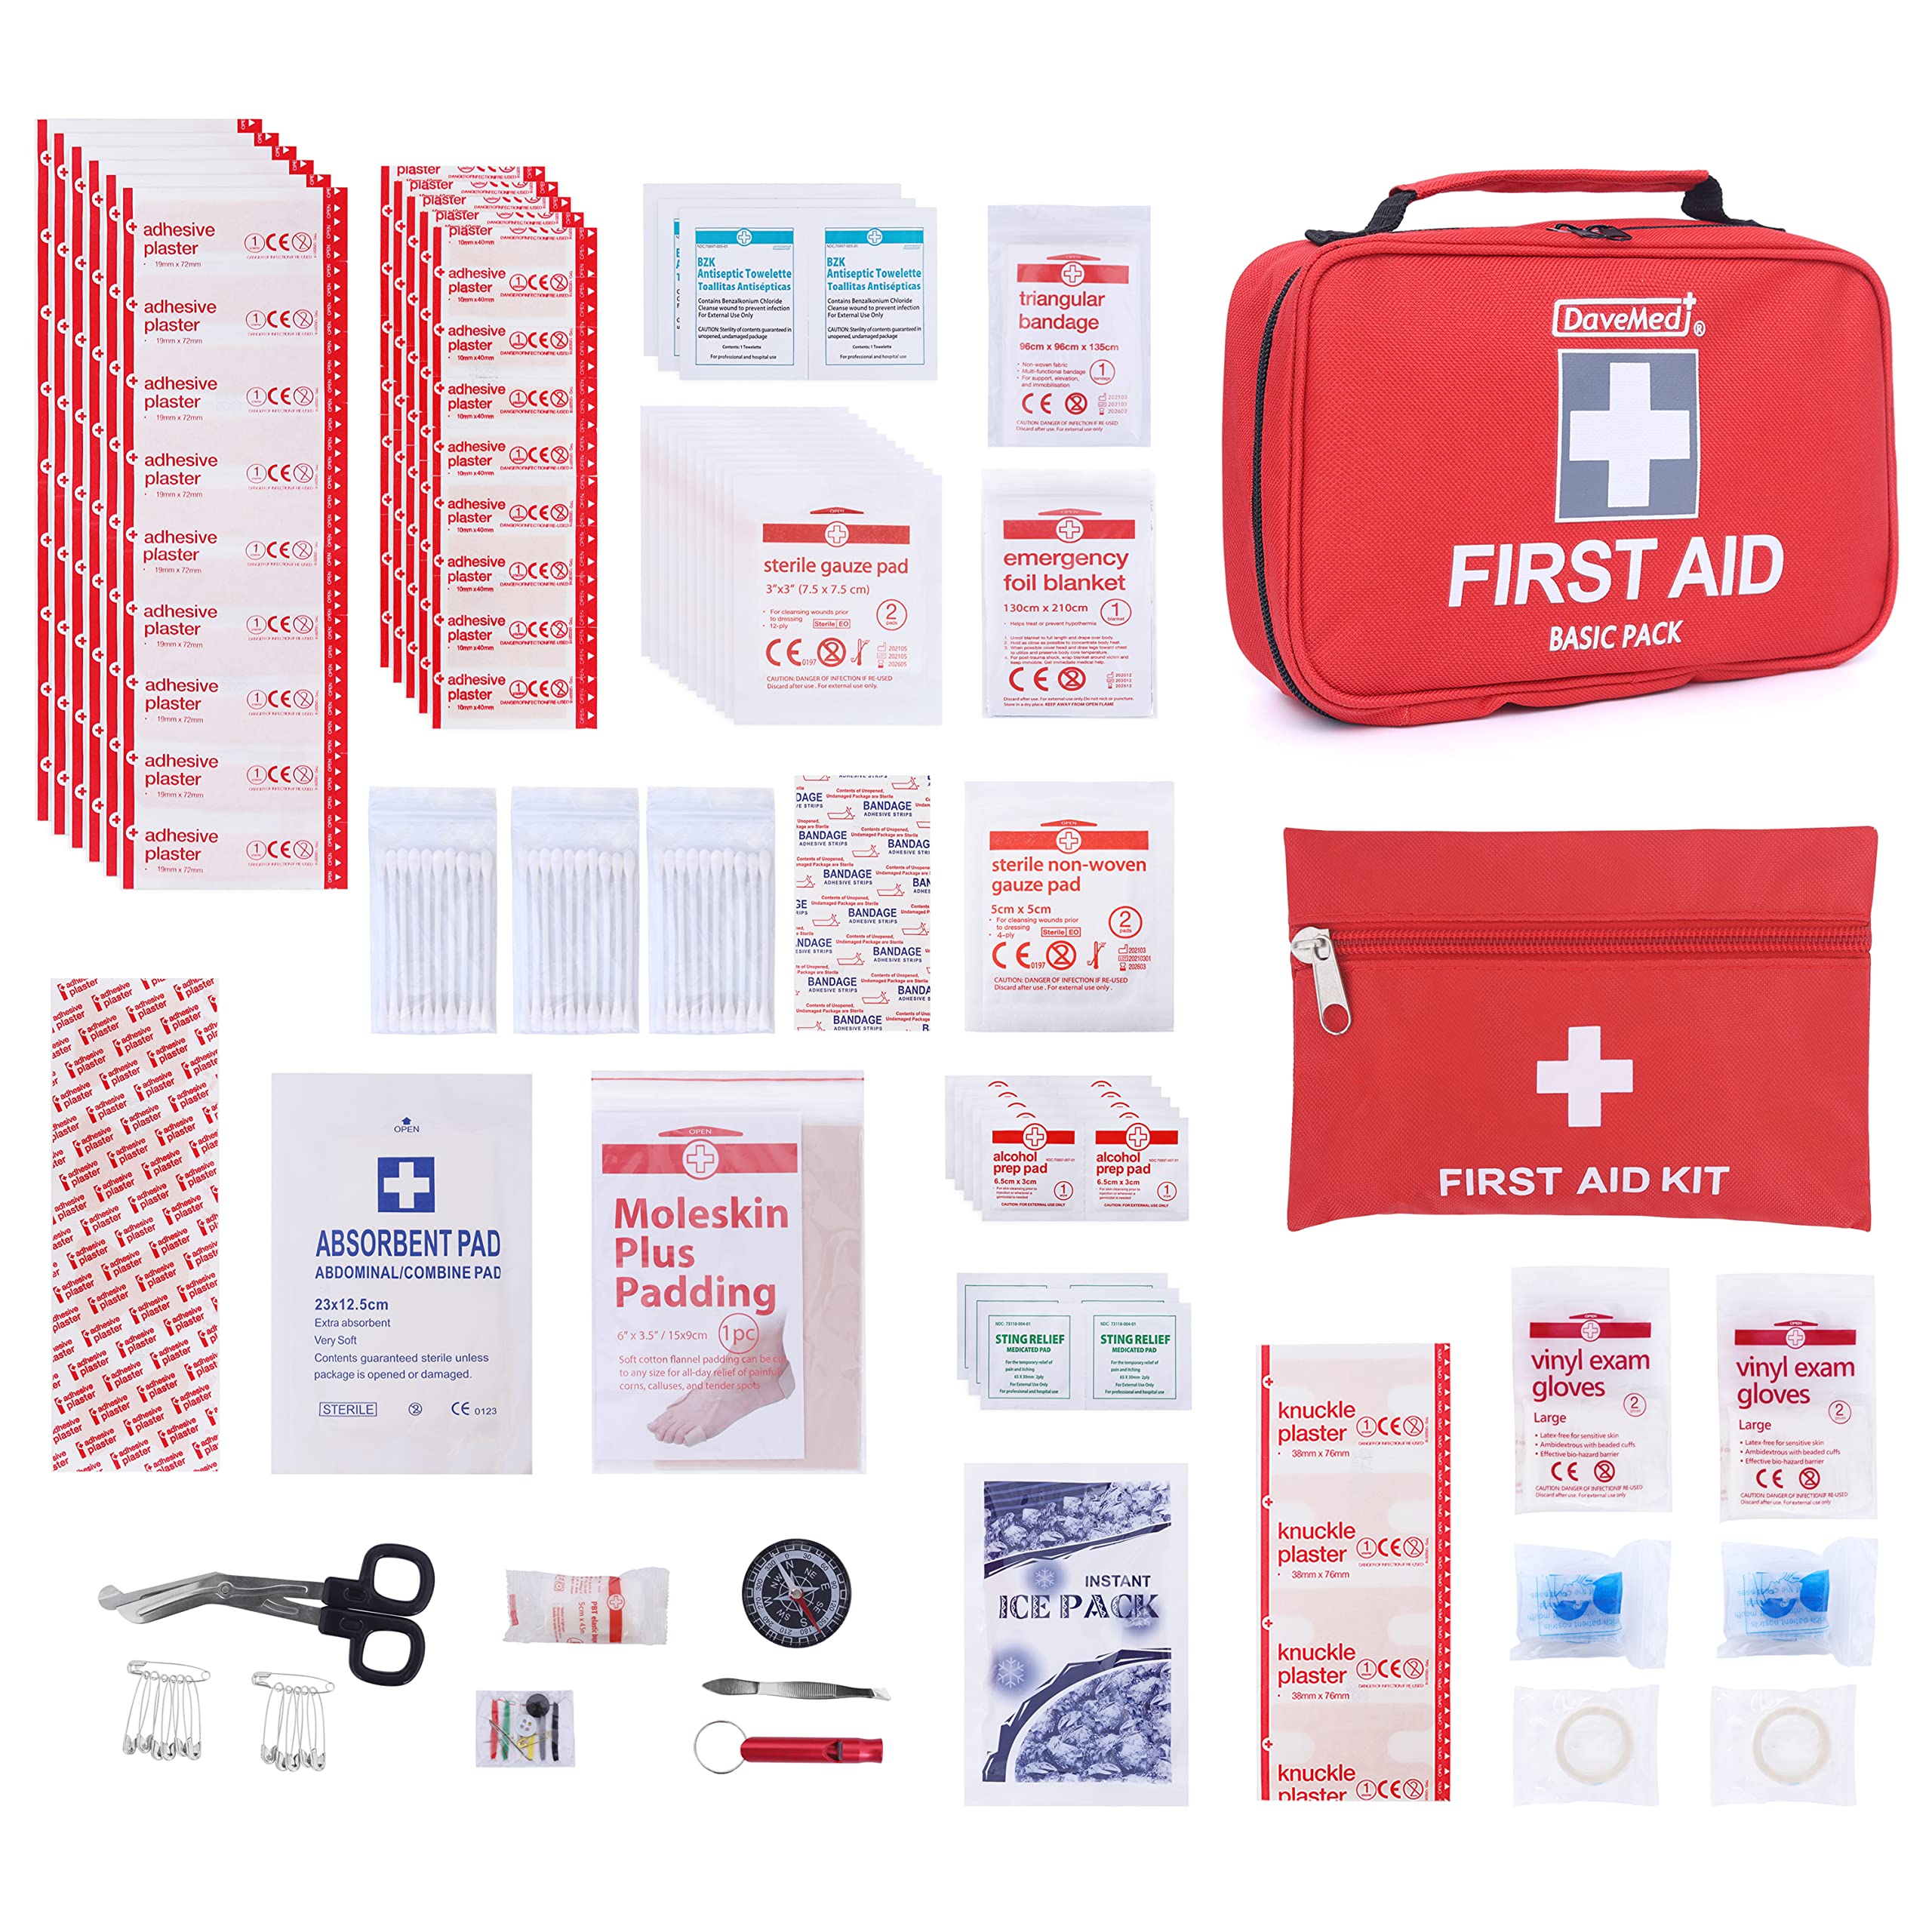 DAVEMED Travel First Aid Kit,230Pieces Car First Aid Kit,2-in-1 First Aid Kit+Extra Mini First Aid Kit for Home,Backpacking,Camping,Hiking,Hunting,Office,Sports & Outdoor